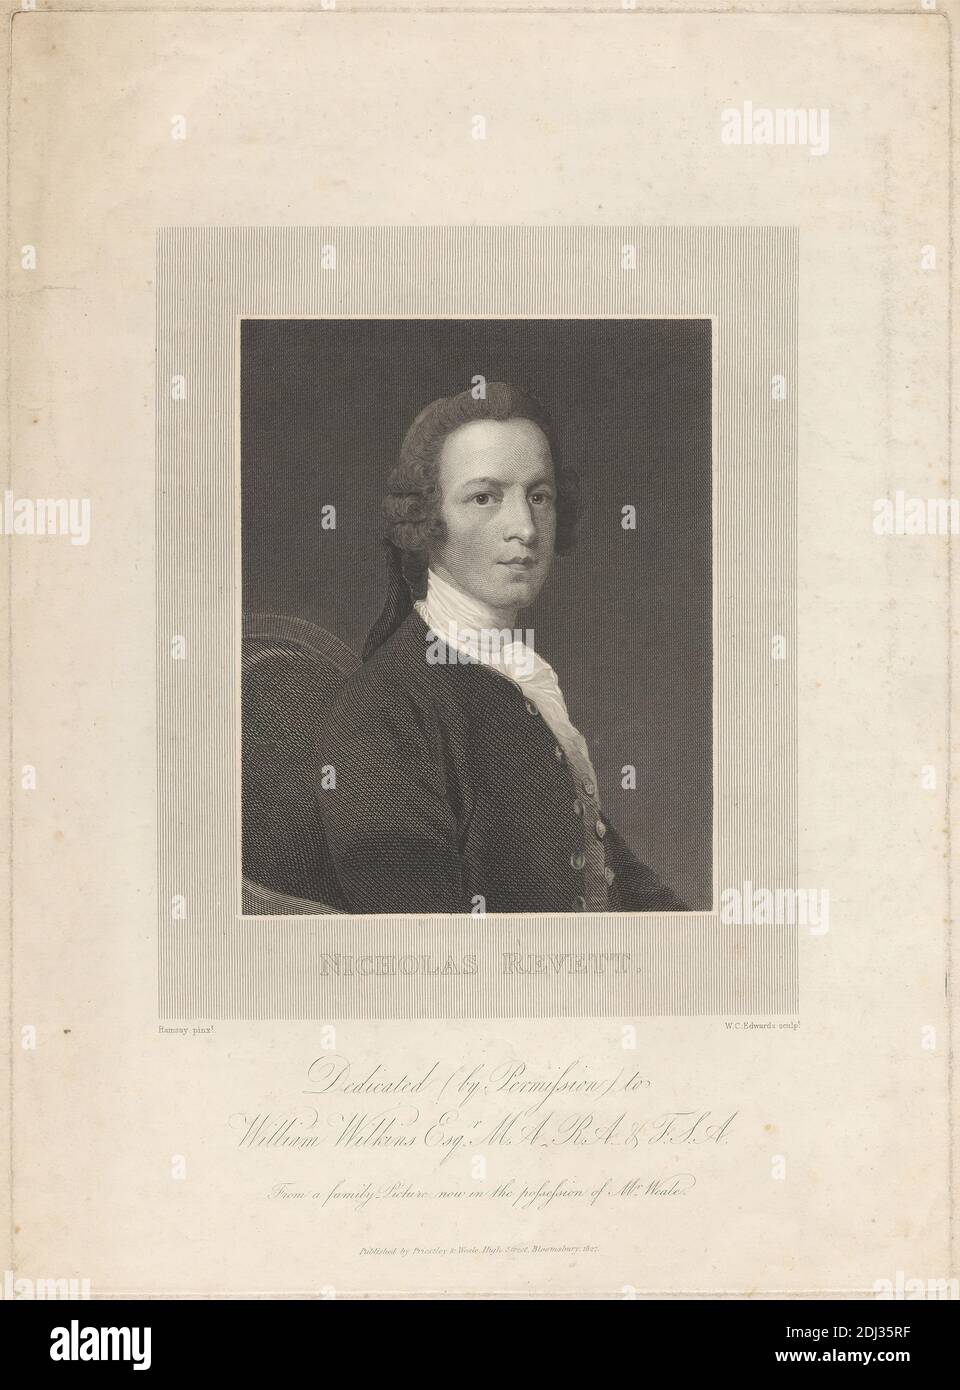 Clapham, William Ellis, 1747–1810, British, after William Ellis, 1747–1810, British, 1792, Aquatint and etching on moderately thick, slightly textured, cream wove paper, Sheet: 5 3/4 x 7 5/8 inches (14.6 x 19.3 cm) and Image: 5 1/16 x 7 7/16 inches (12.9 x 18.9 cm), boys, buildings, children, church, costume, family, father, fishing, fishing poles, genre subject, gown, hats, landscape, leisure, man, mother, park (grounds), pond, sons, tailcoat, town, trees, village, woman, Clapham, Clapham Common, England, Greater London, Holy Trinity Clapham, Lambeth, United Kingdom Stock Photo